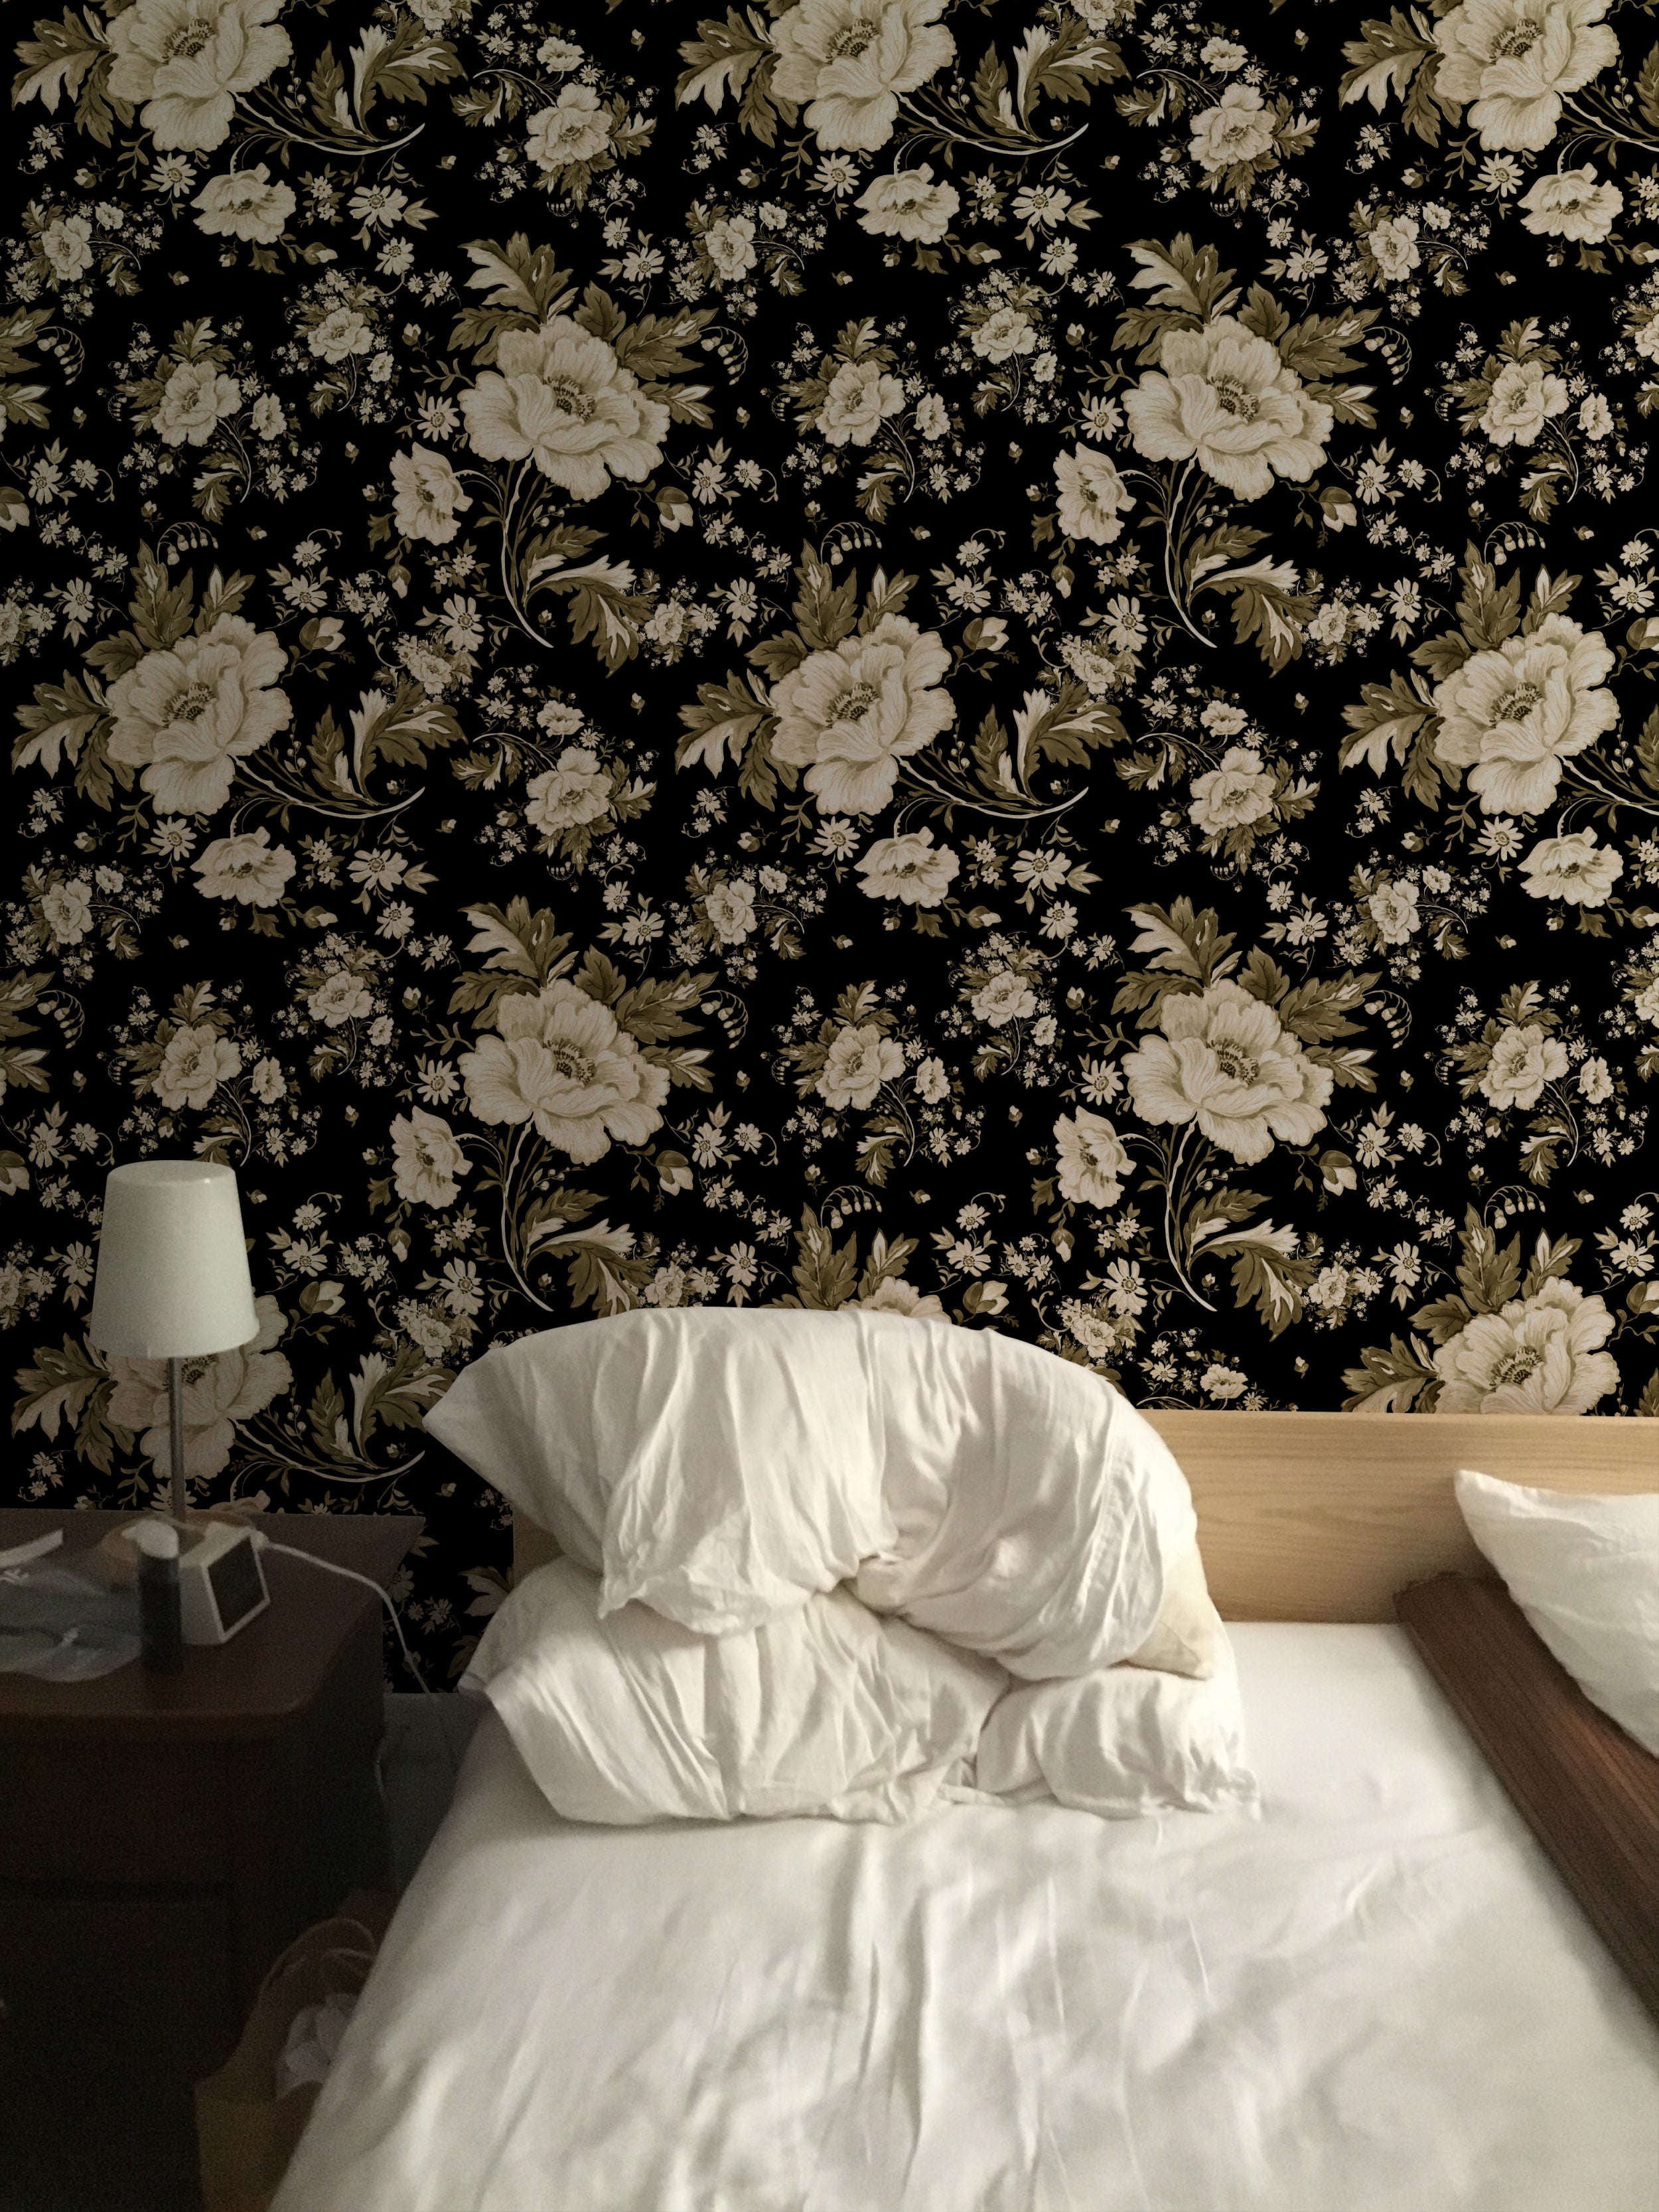 A cozy bedroom scene where the Midnight Garden Wallpaper creates a striking backdrop. The black background with white floral prints offers a bold contrast to the soft white bedding and the small bedside lamp, crafting a tranquil yet sophisticated sleeping area.